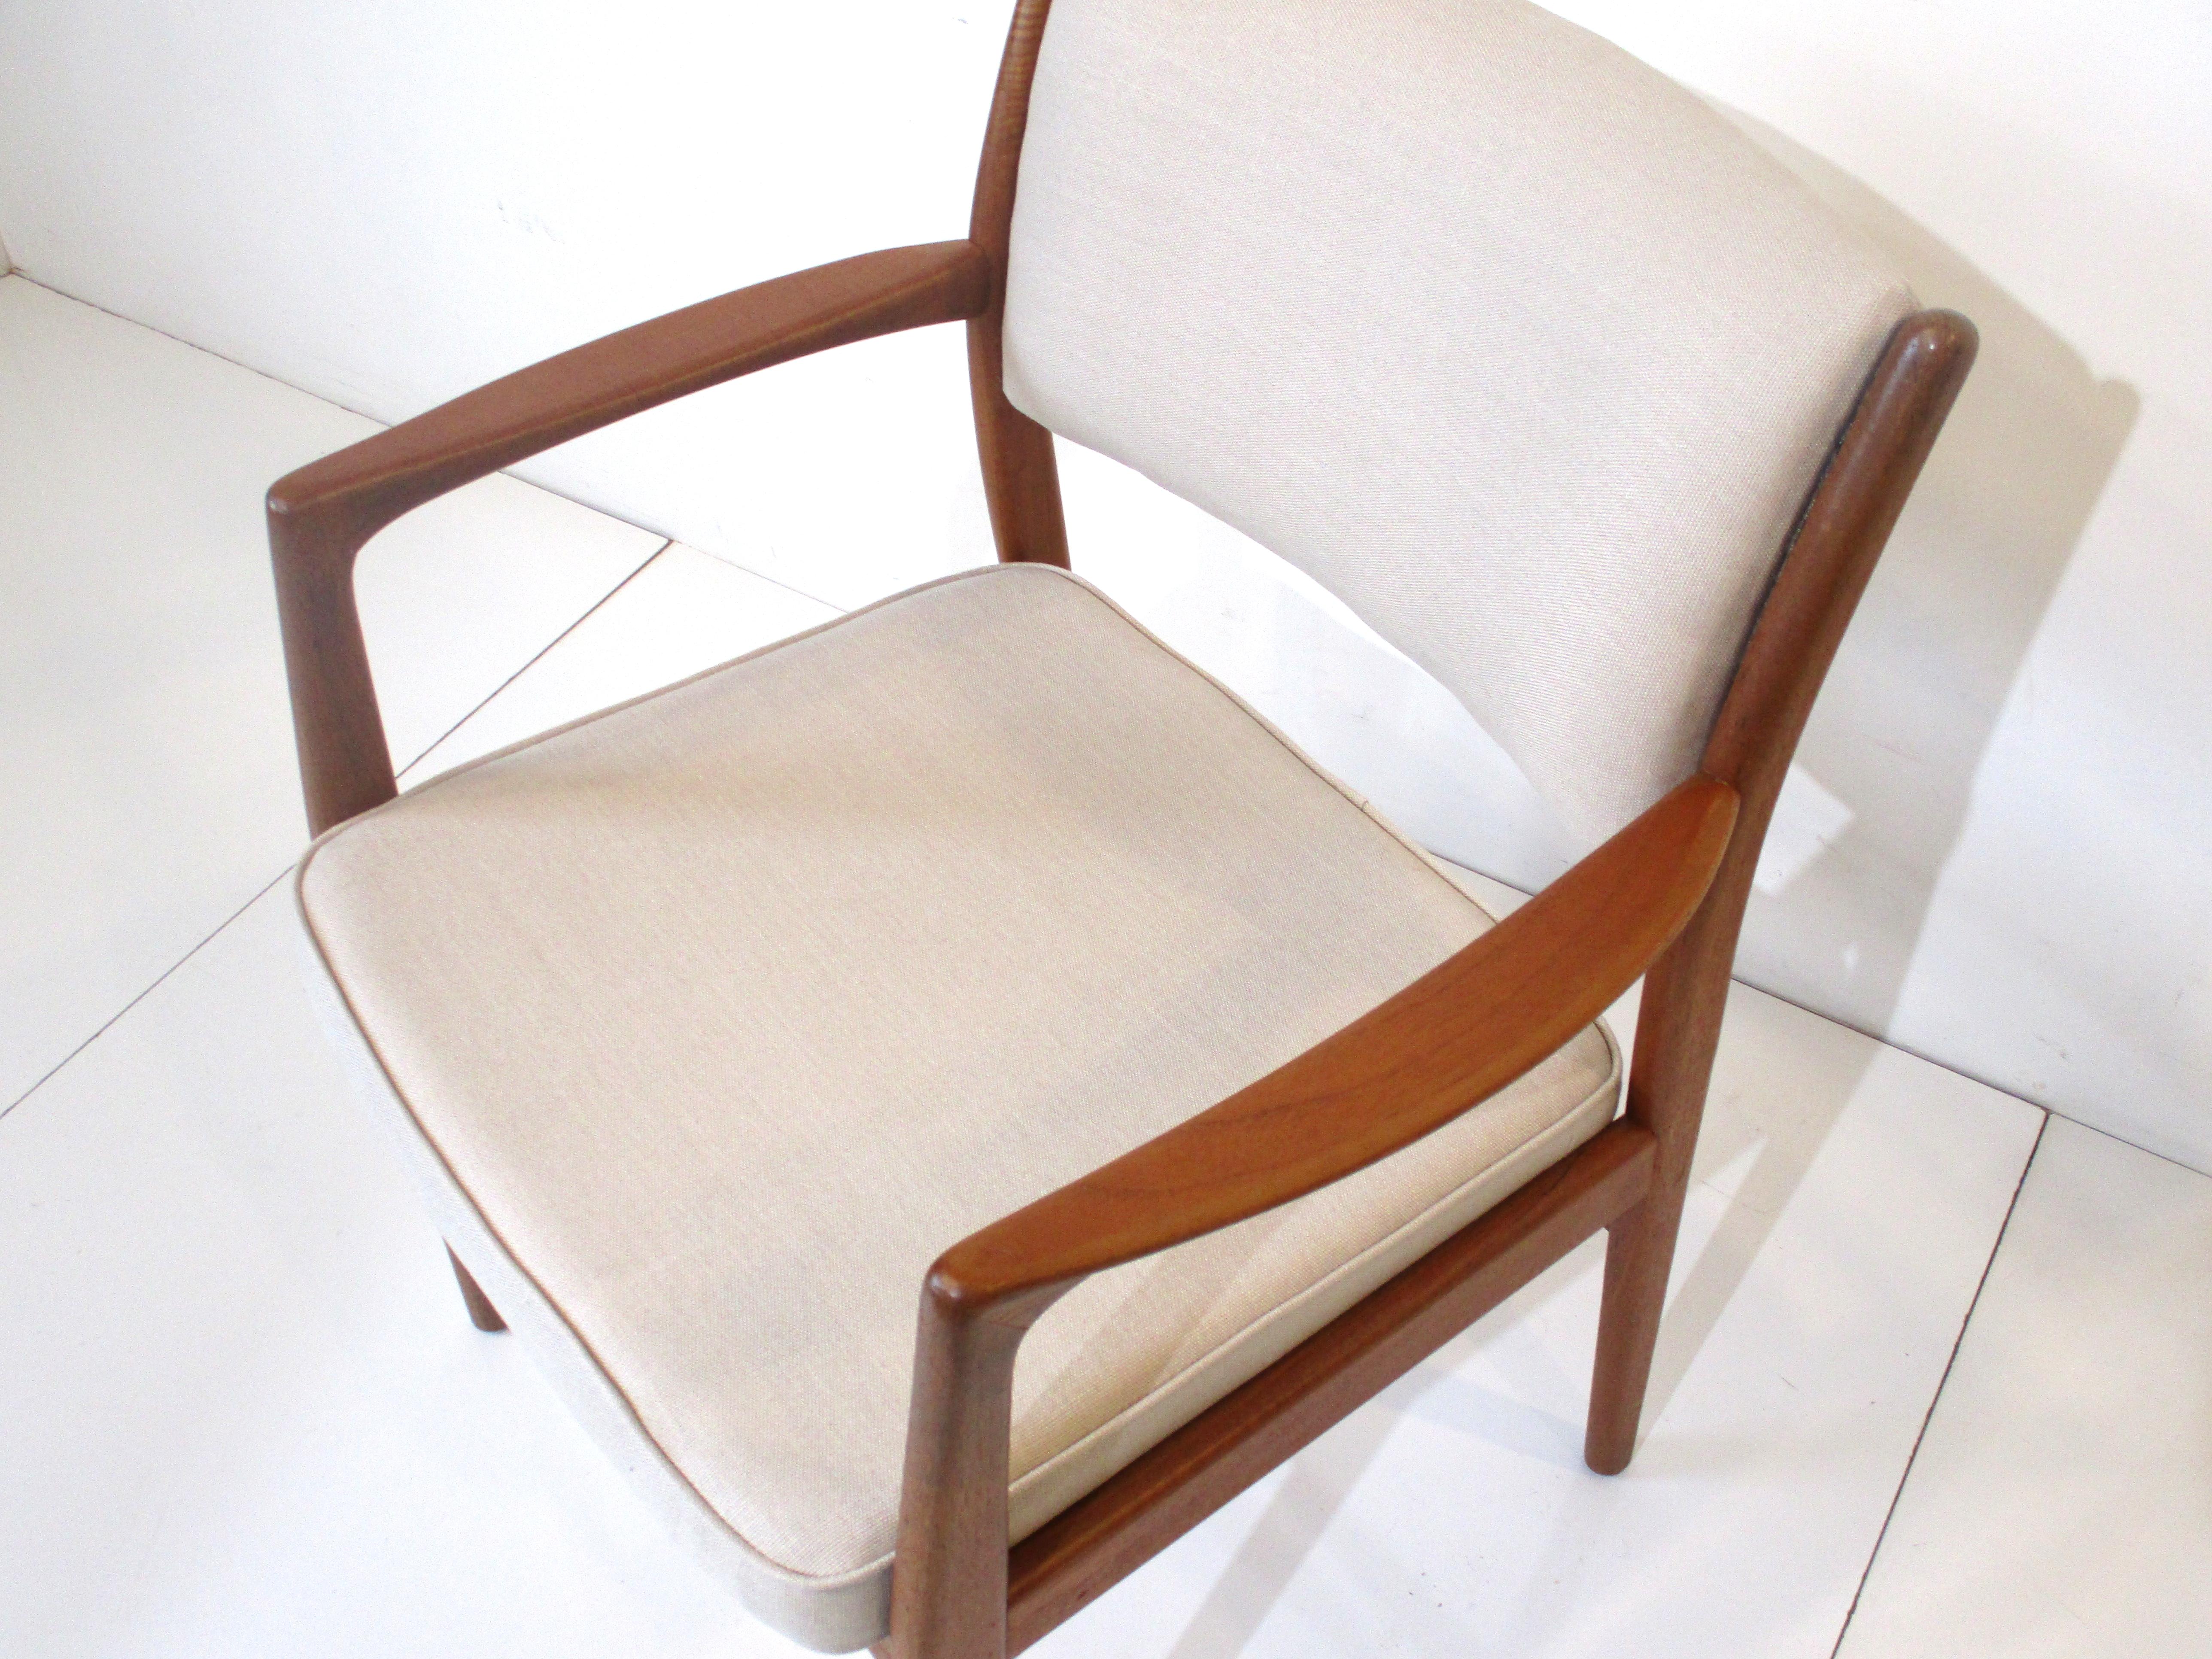 20th Century Teak Occasional Chair by Dux / Ekselius, Ohlsson Sweden For Sale